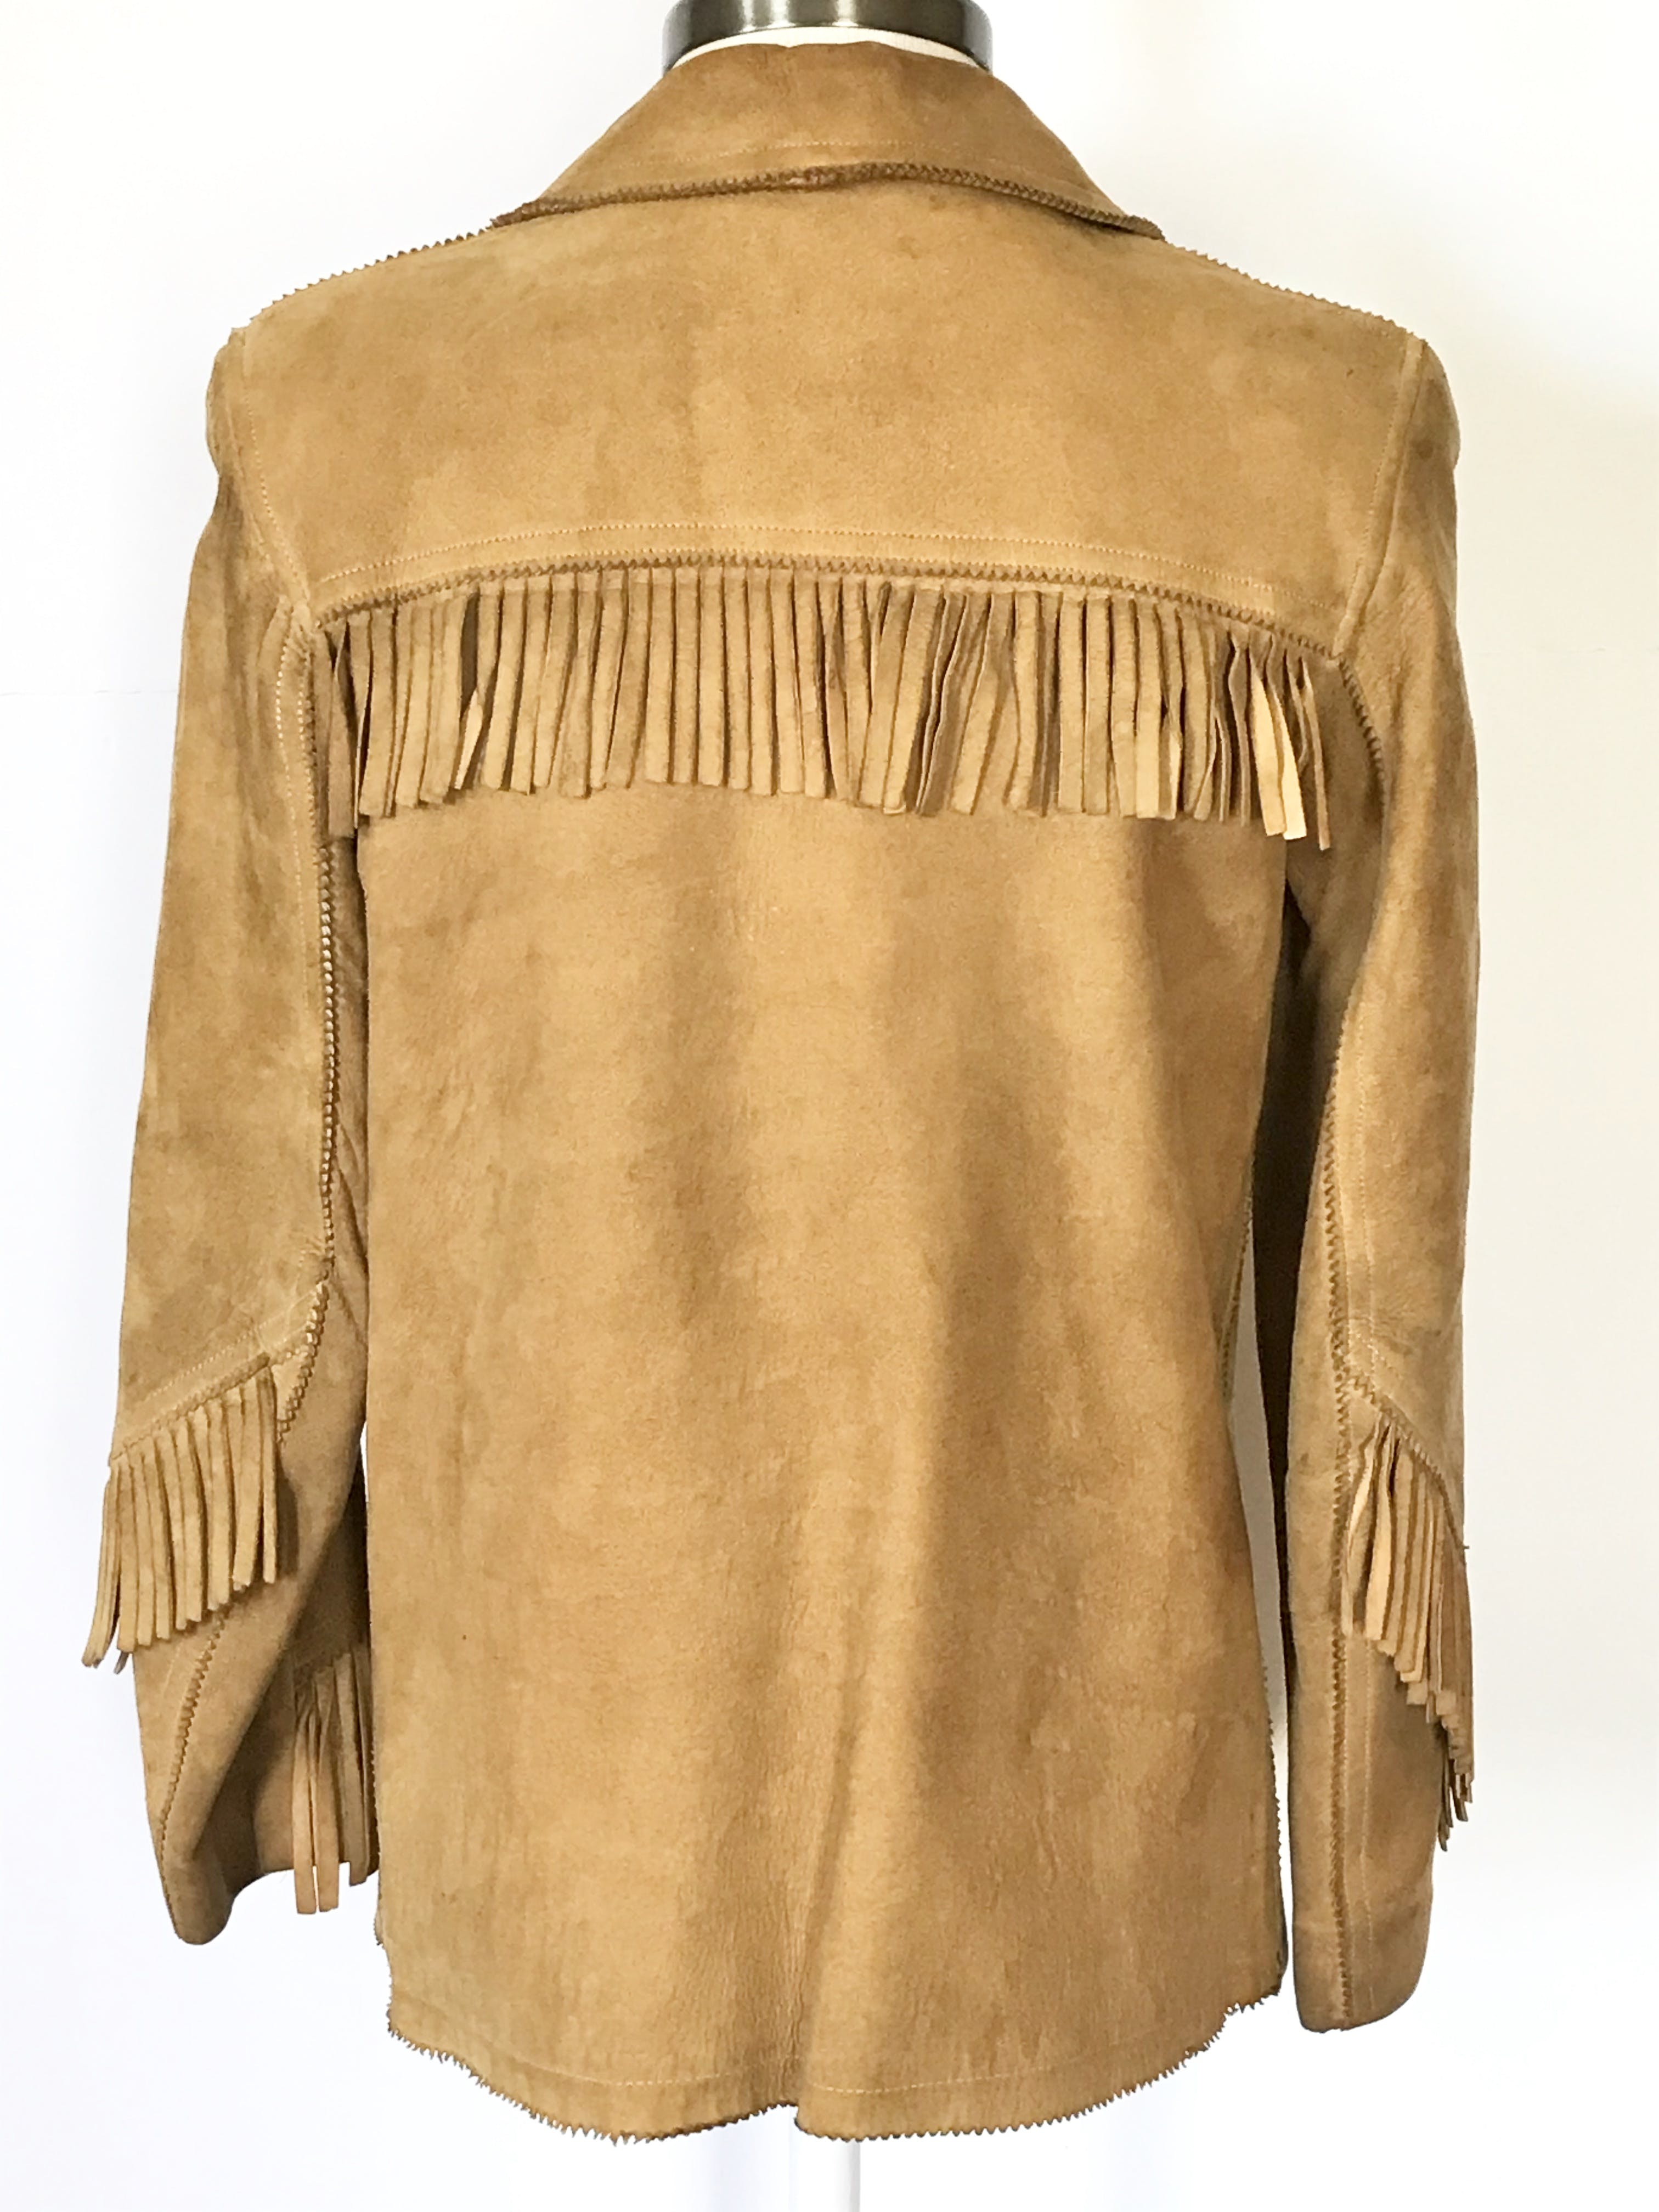 Vintage 60's Brown Suede Leather Jacket with Fringe by Field Stream ...